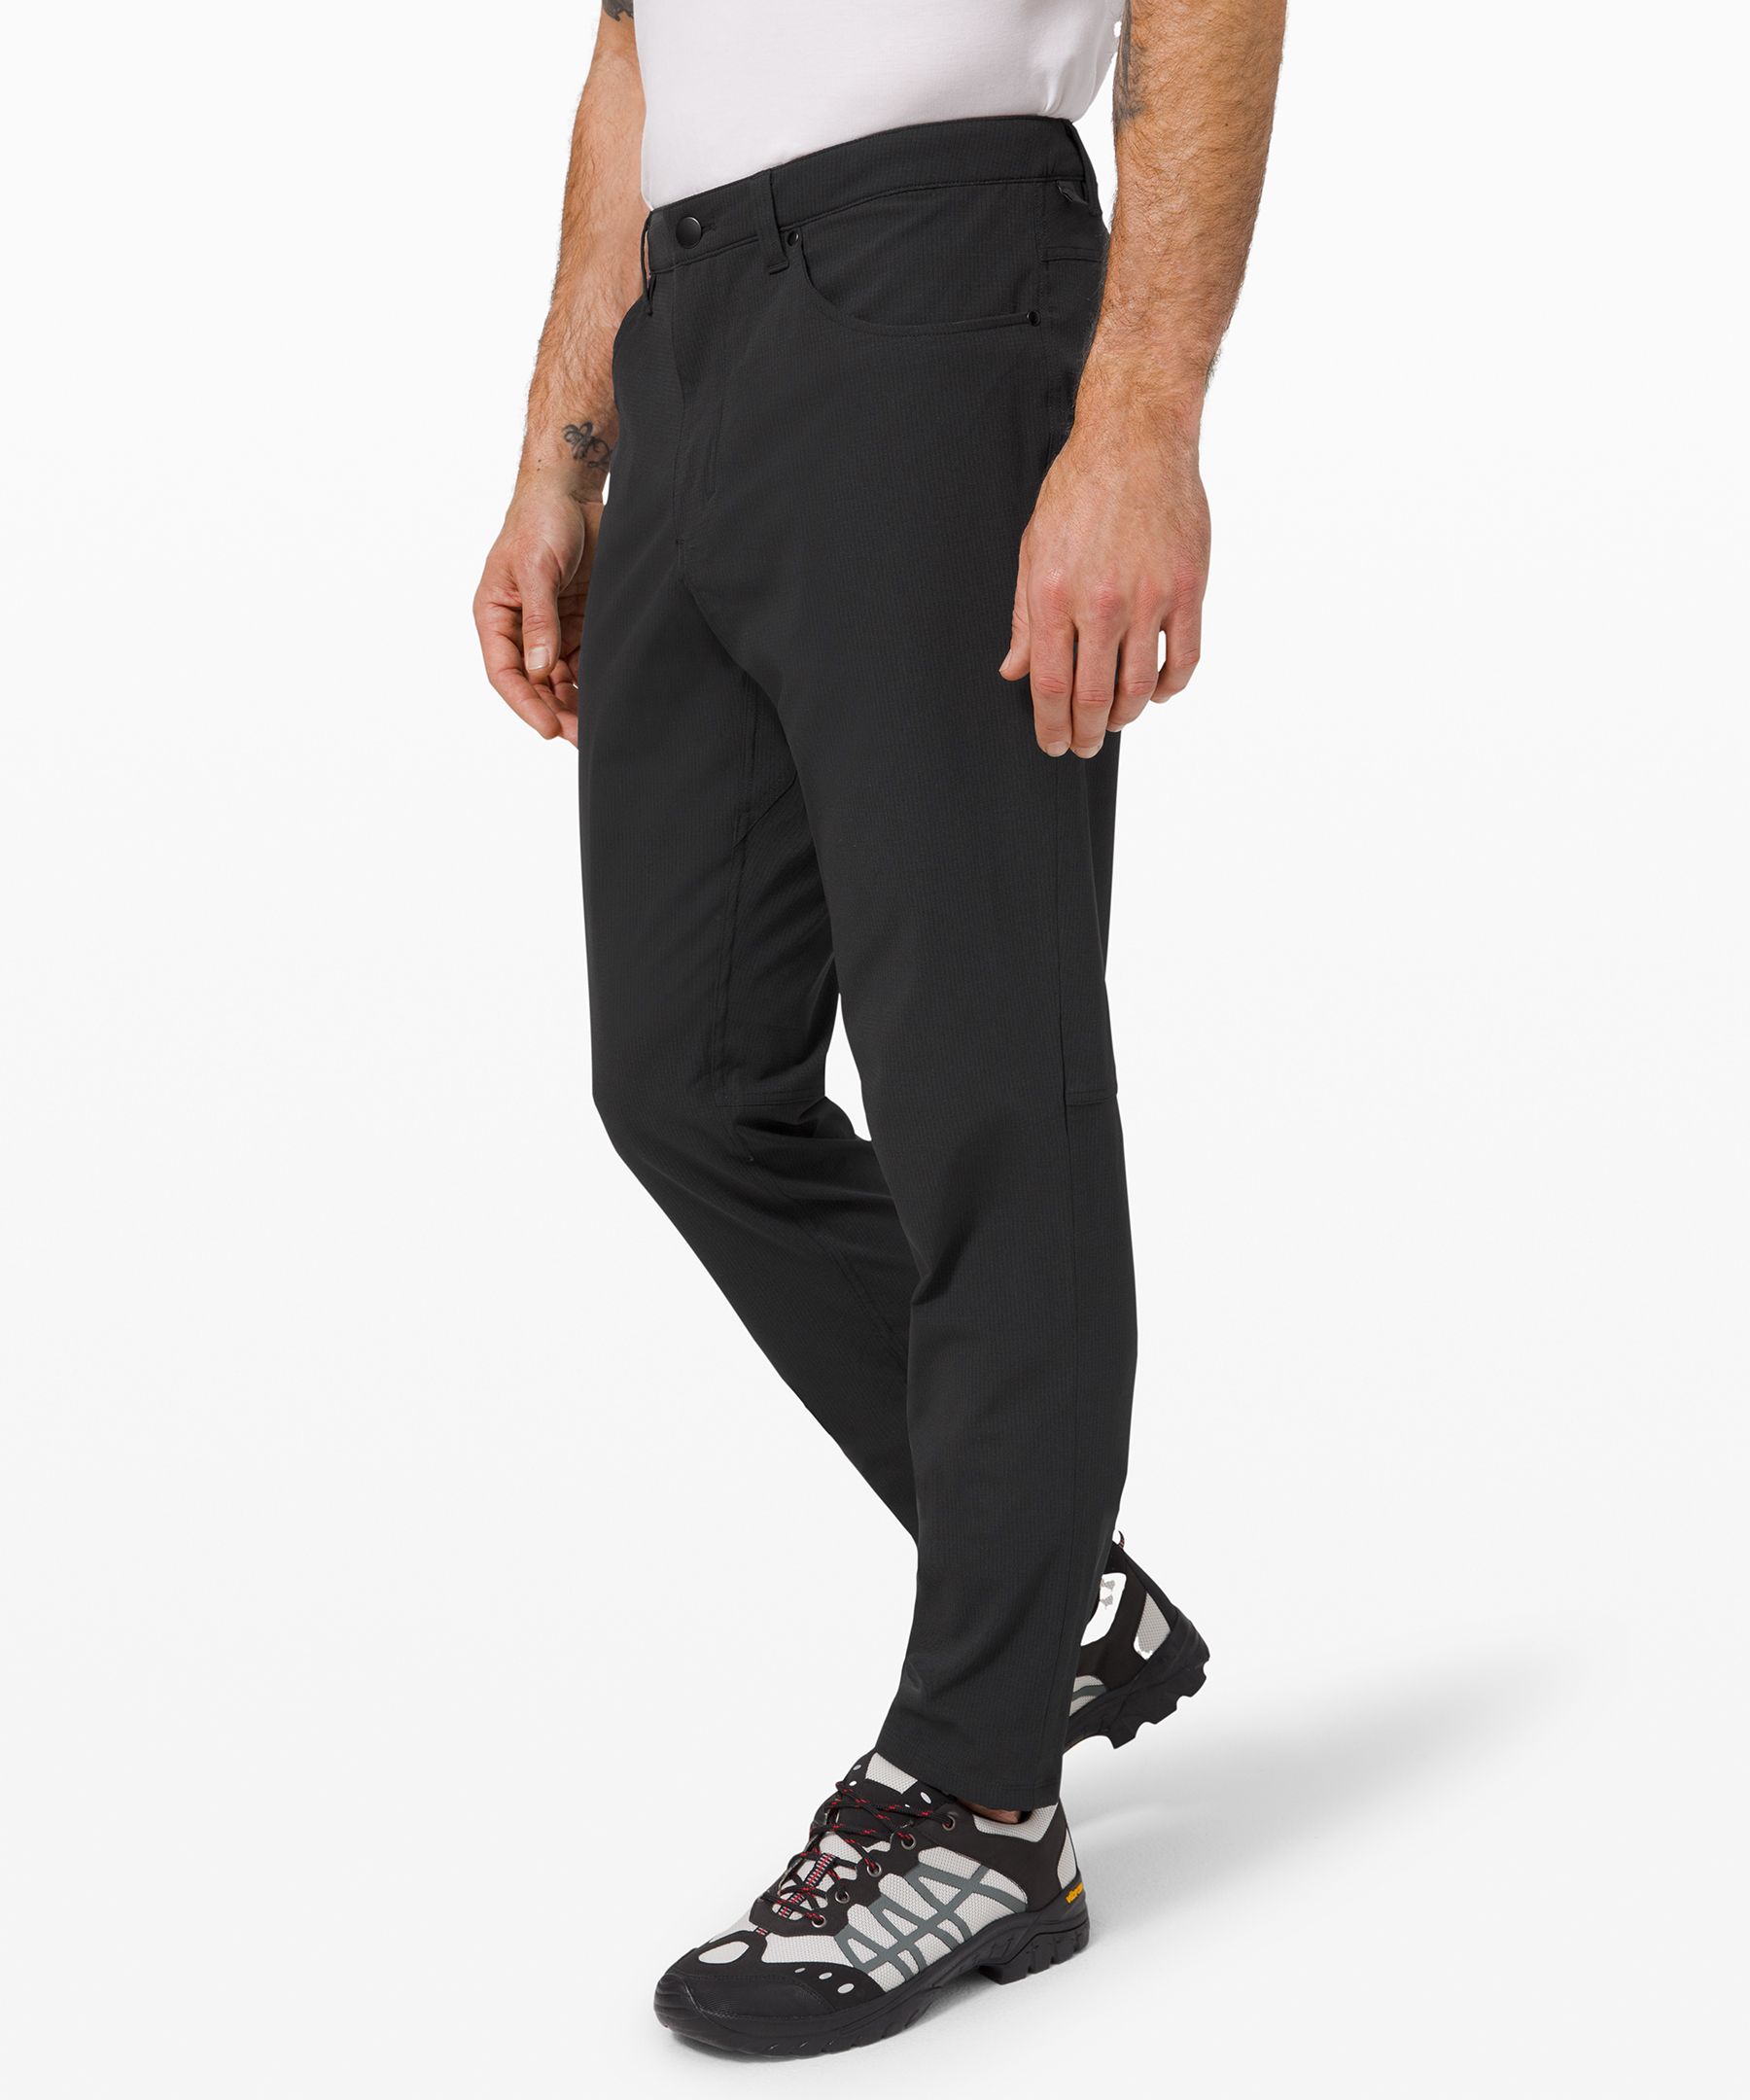 Lululemon Abc Pants Review Redditlist  International Society of Precision  Agriculture